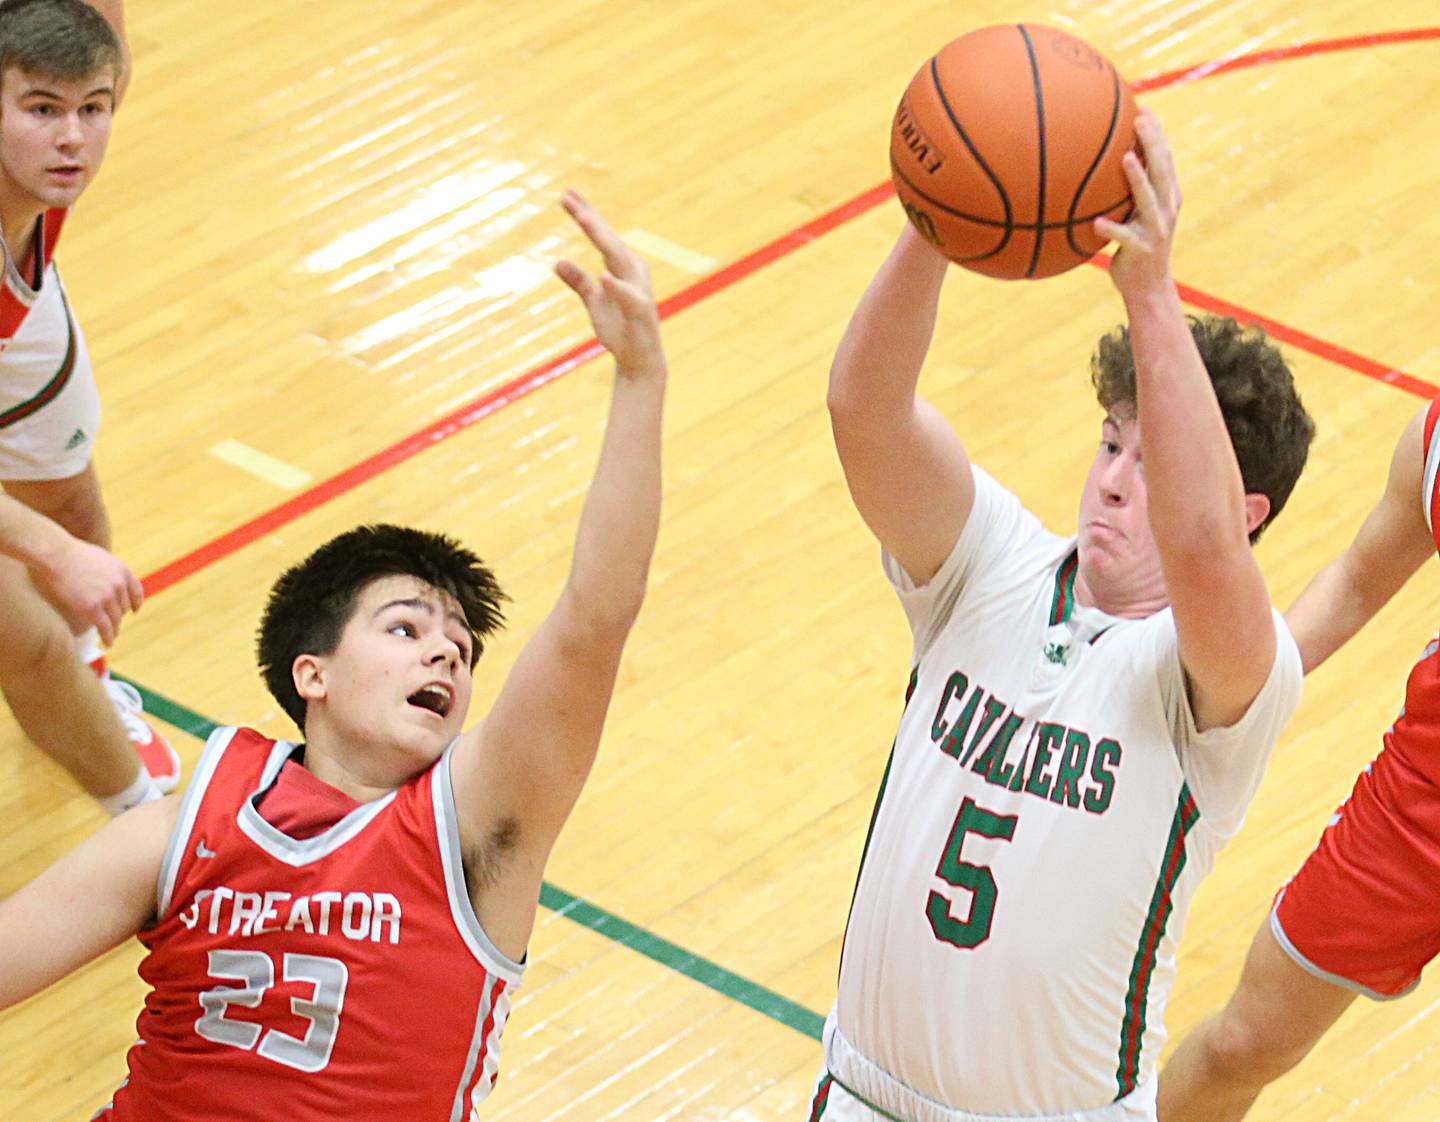 L-P's Tommy Hartman grabs a rebound over Streator's Logan Aukland on Thursday, Jan. 28, 2023 at L-P High School.